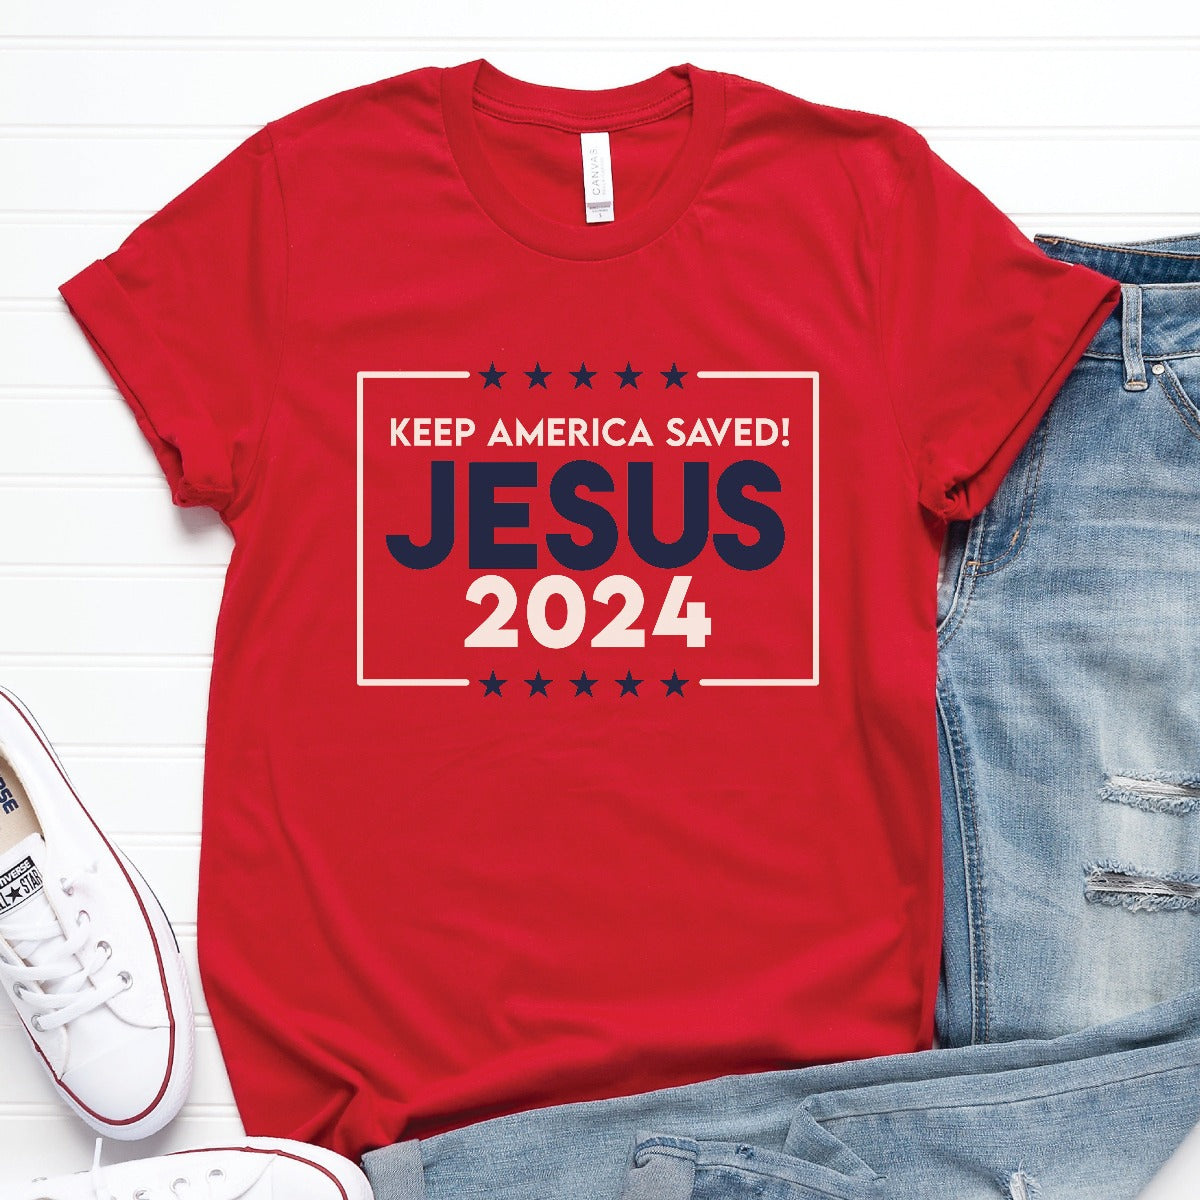 Patriotic Red Bella Canvas 3001 Presidential election vote unisex Christian t-shirt with "Jesus 2024 Keep America Saved" printed in bold white and navy blue fonts, made in the USA for men and women God & Country Patriots